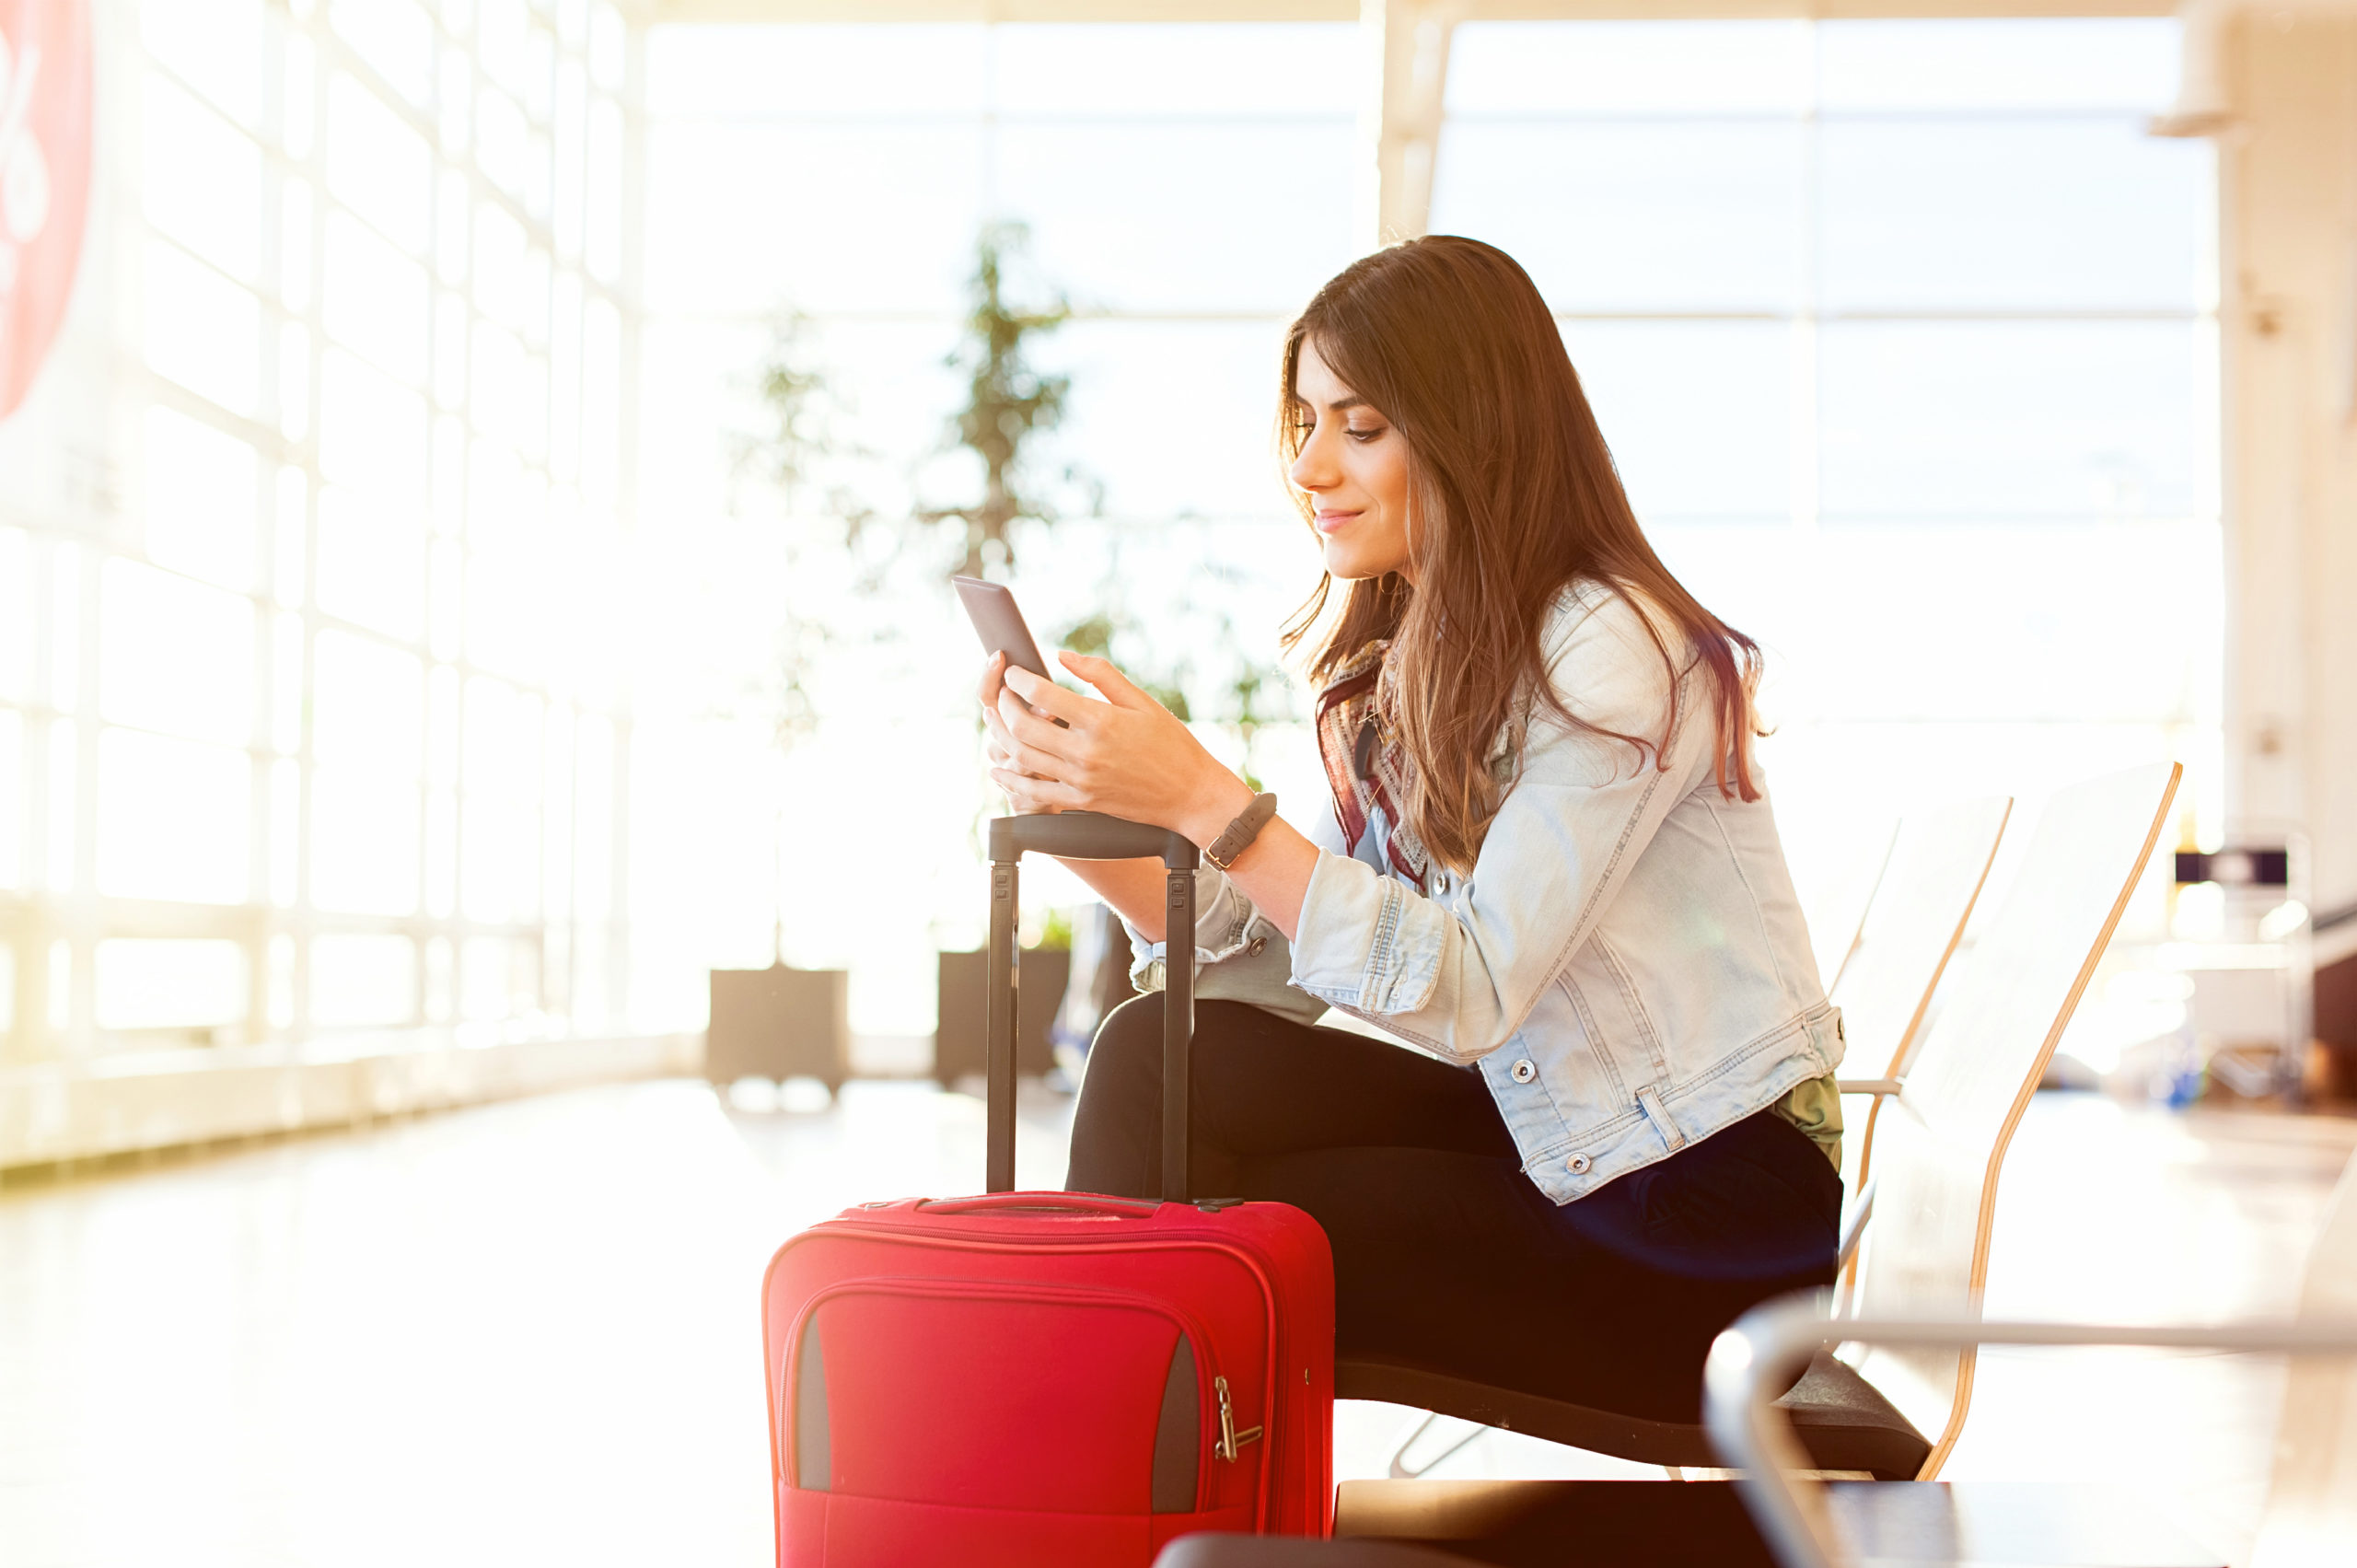 woman waiting in airport with luggage, phone, holiday traveling